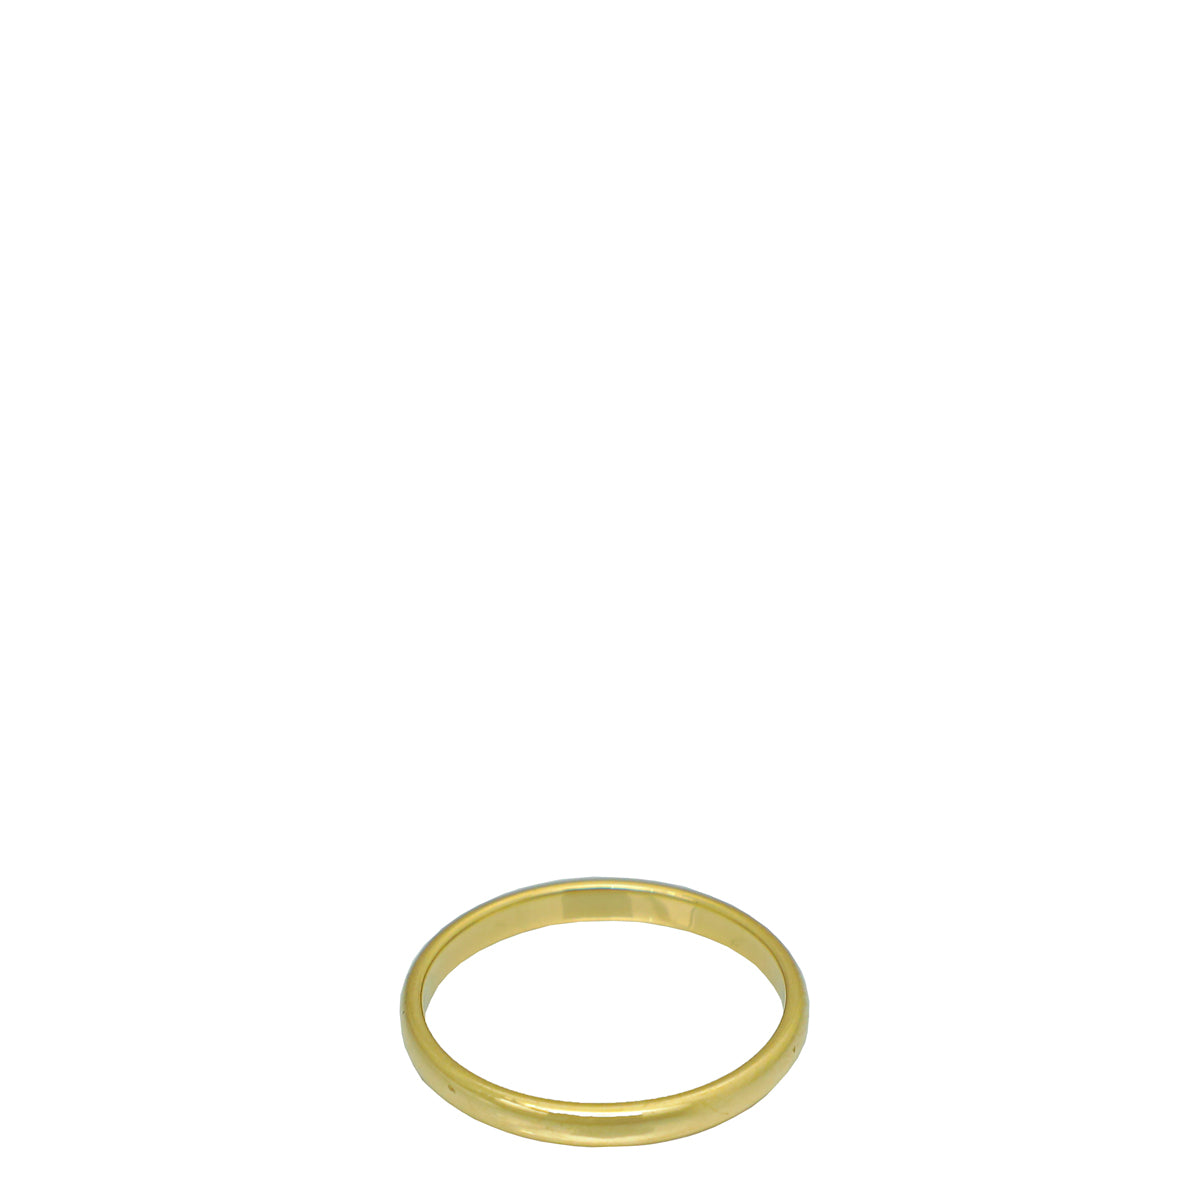 Tiffany & Co 18K Yellow Gold Forever Wedding Band Ring 49